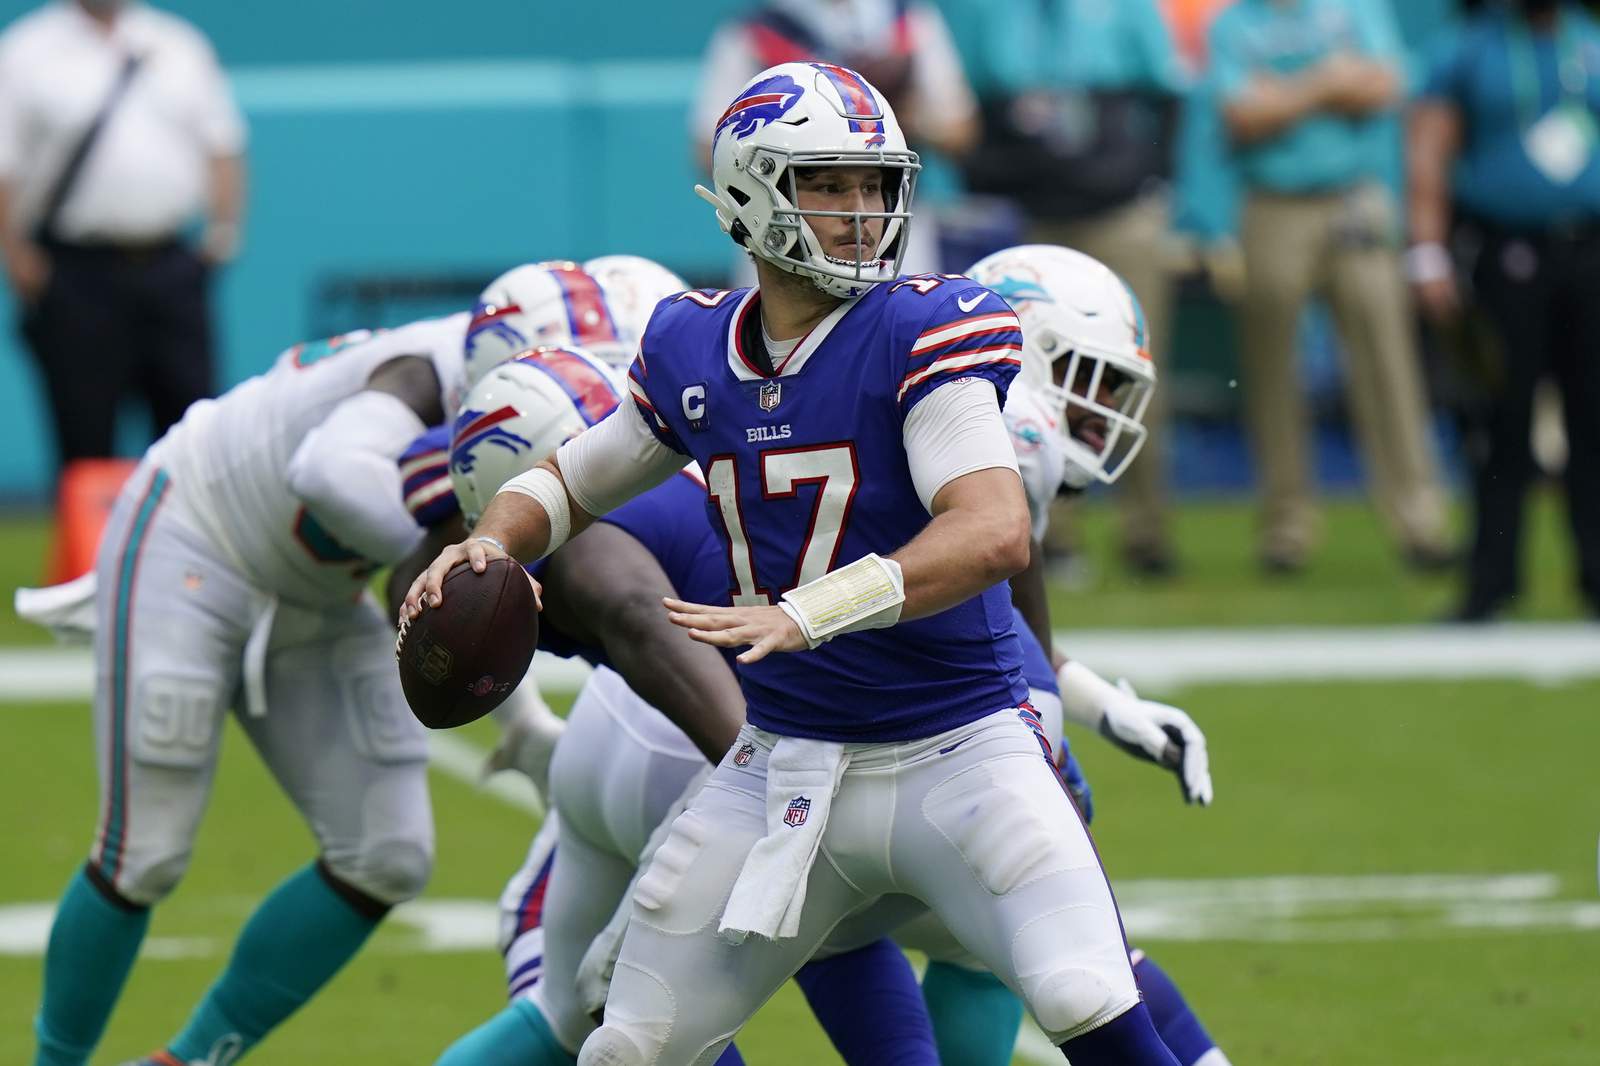 Allen reaches career high in passing as Bills beat Dolphins